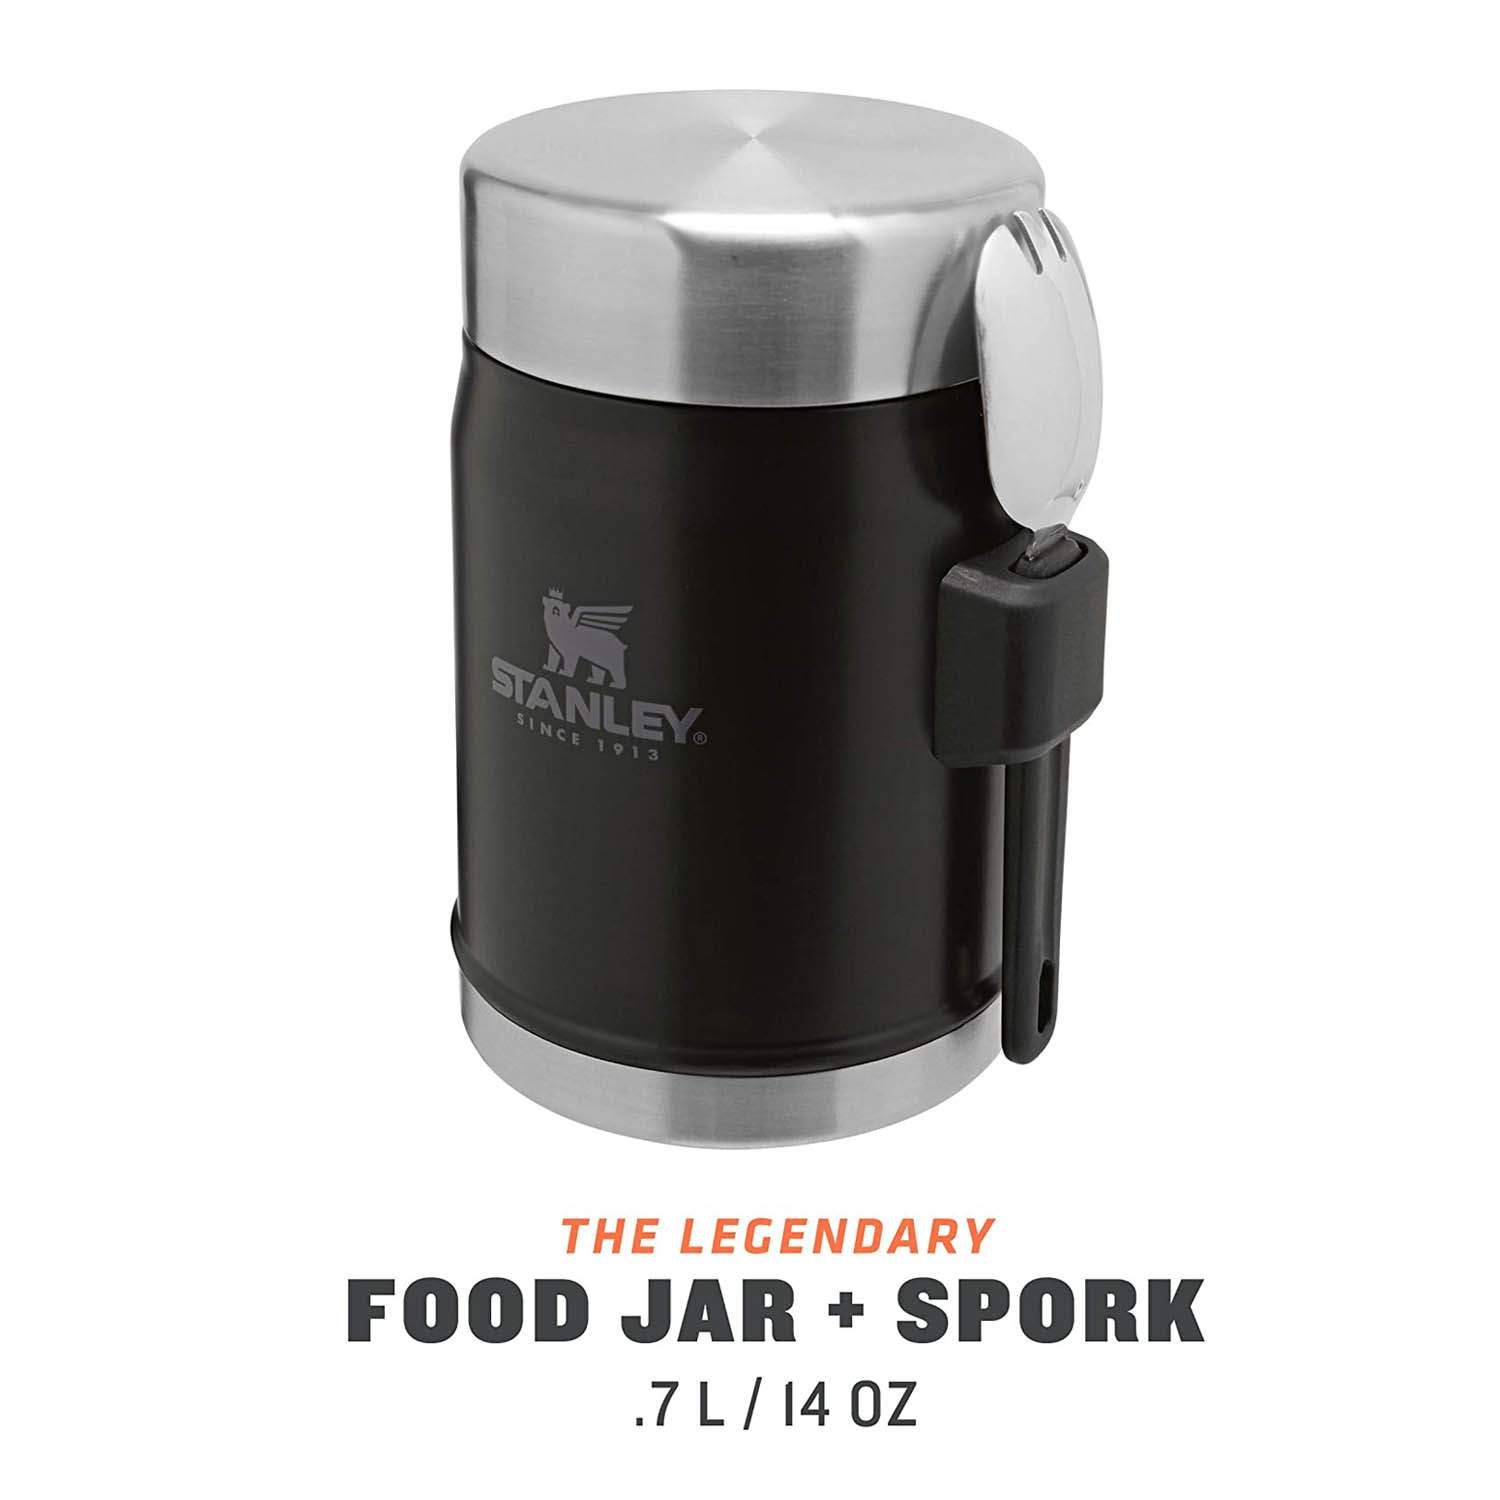 Stanley Classic Legendary Food Jar 0.4L / 14 OZ Matte Black with spork – BPA FREE Stainless Steel Food Thermos | Keeps Cold or Hot for 7 Hours | Leakproof | Lifetime Warranty | Dishwasher safe